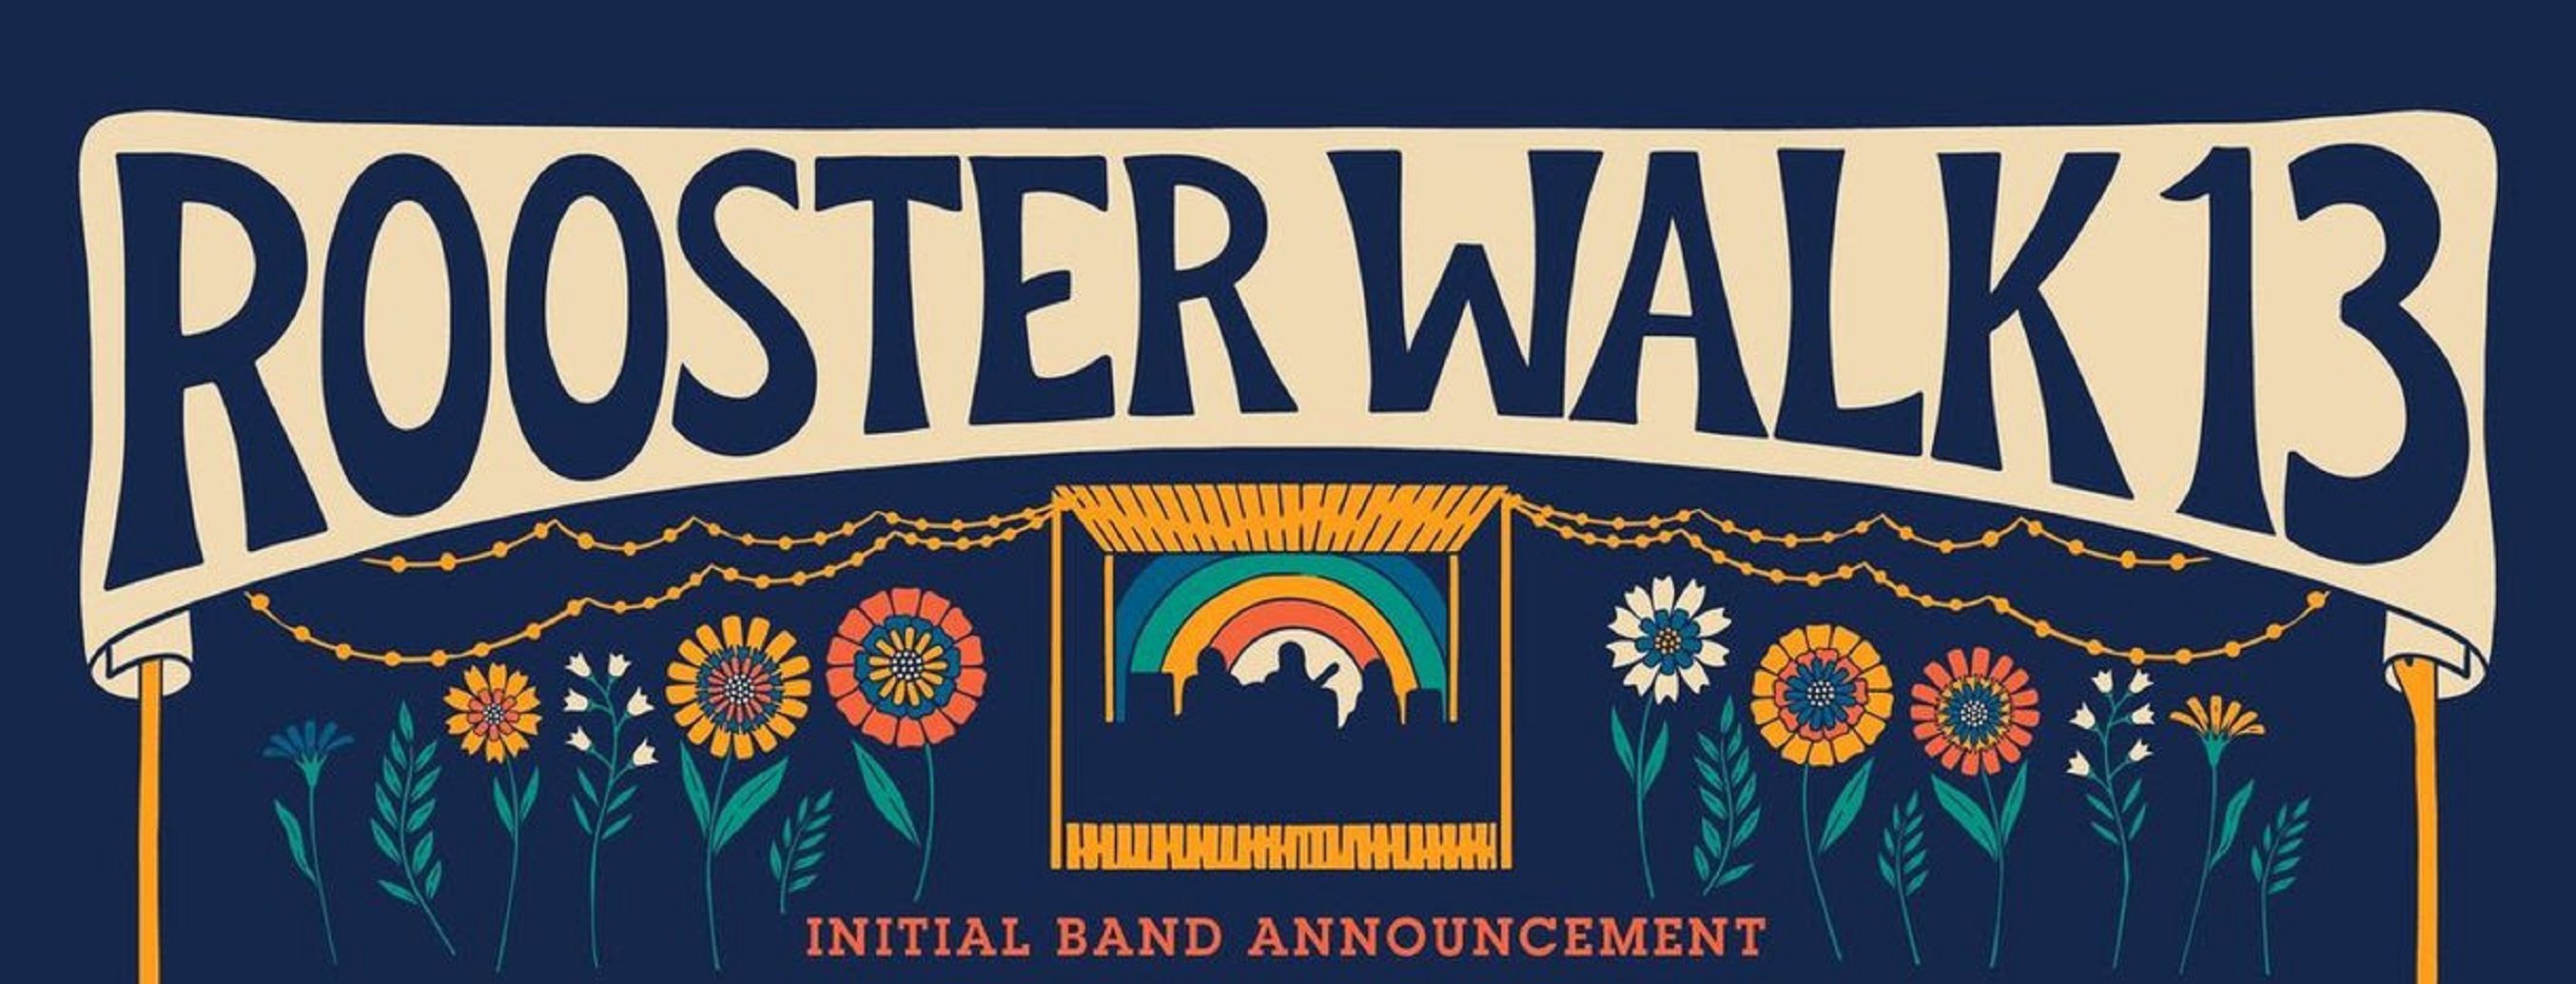 Rooster Walk 13 Announces Initial Band Lineup + Tickets On Sale